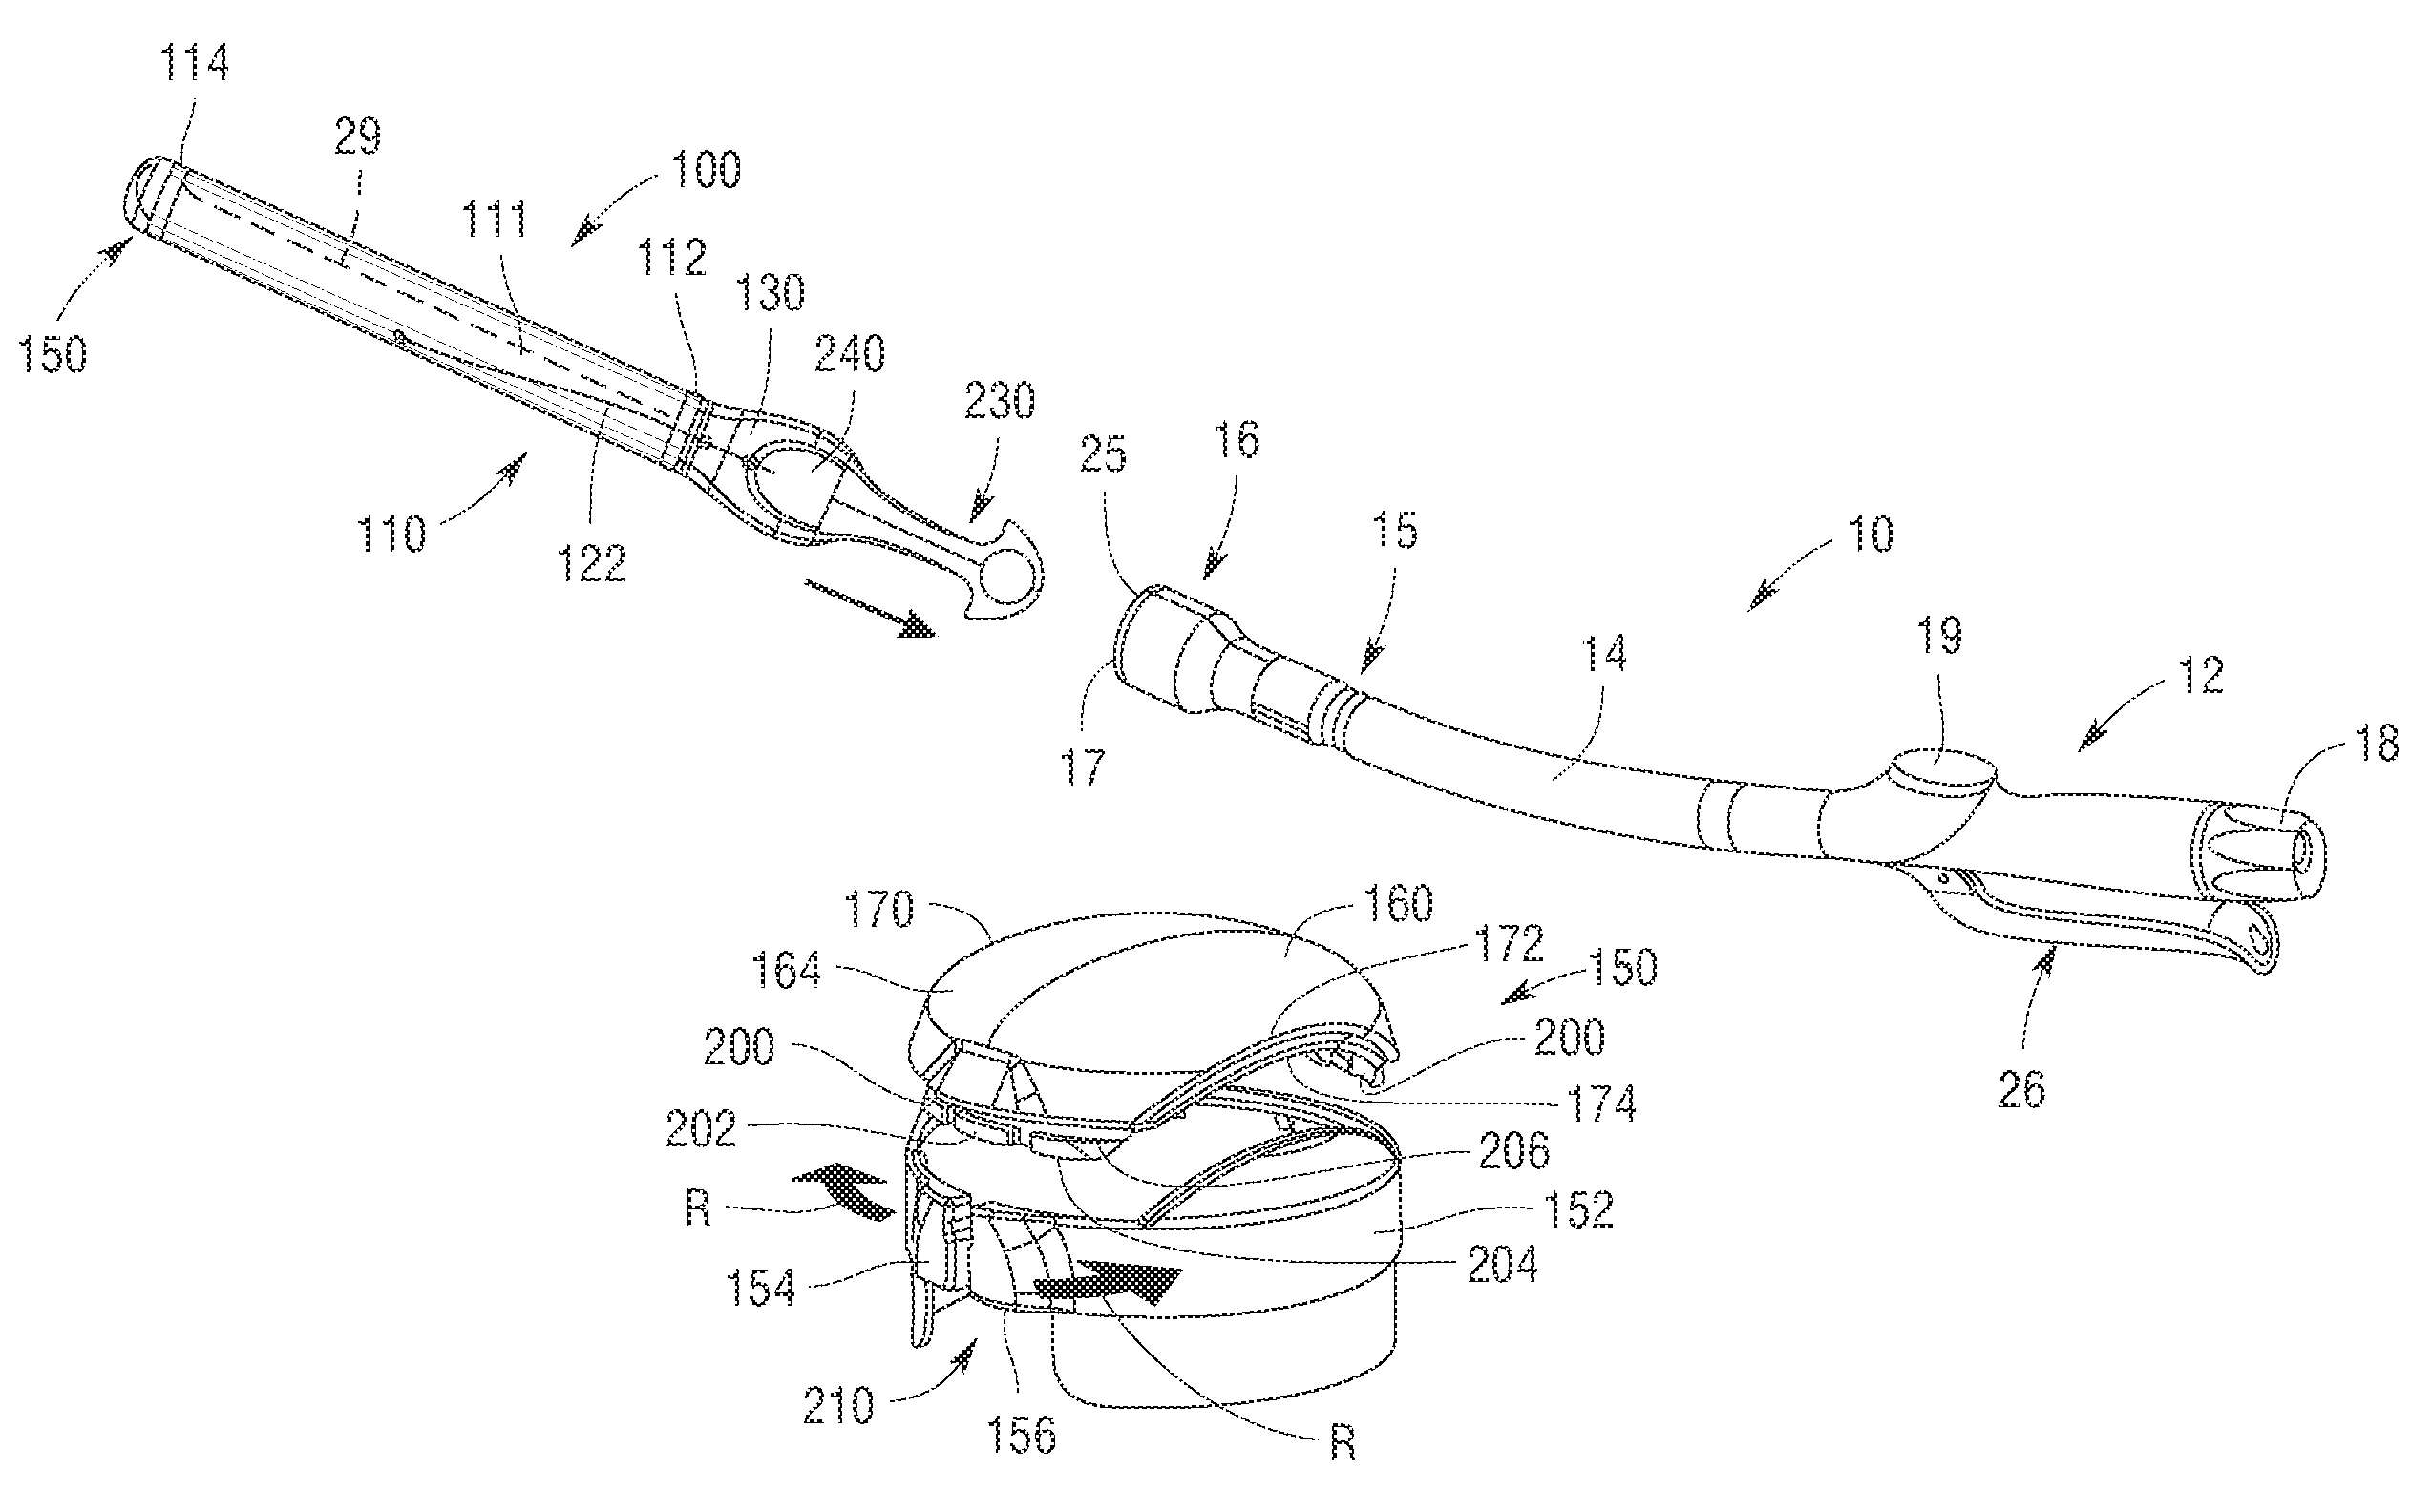 Circular stapler introducer with radially-openable distal end portion